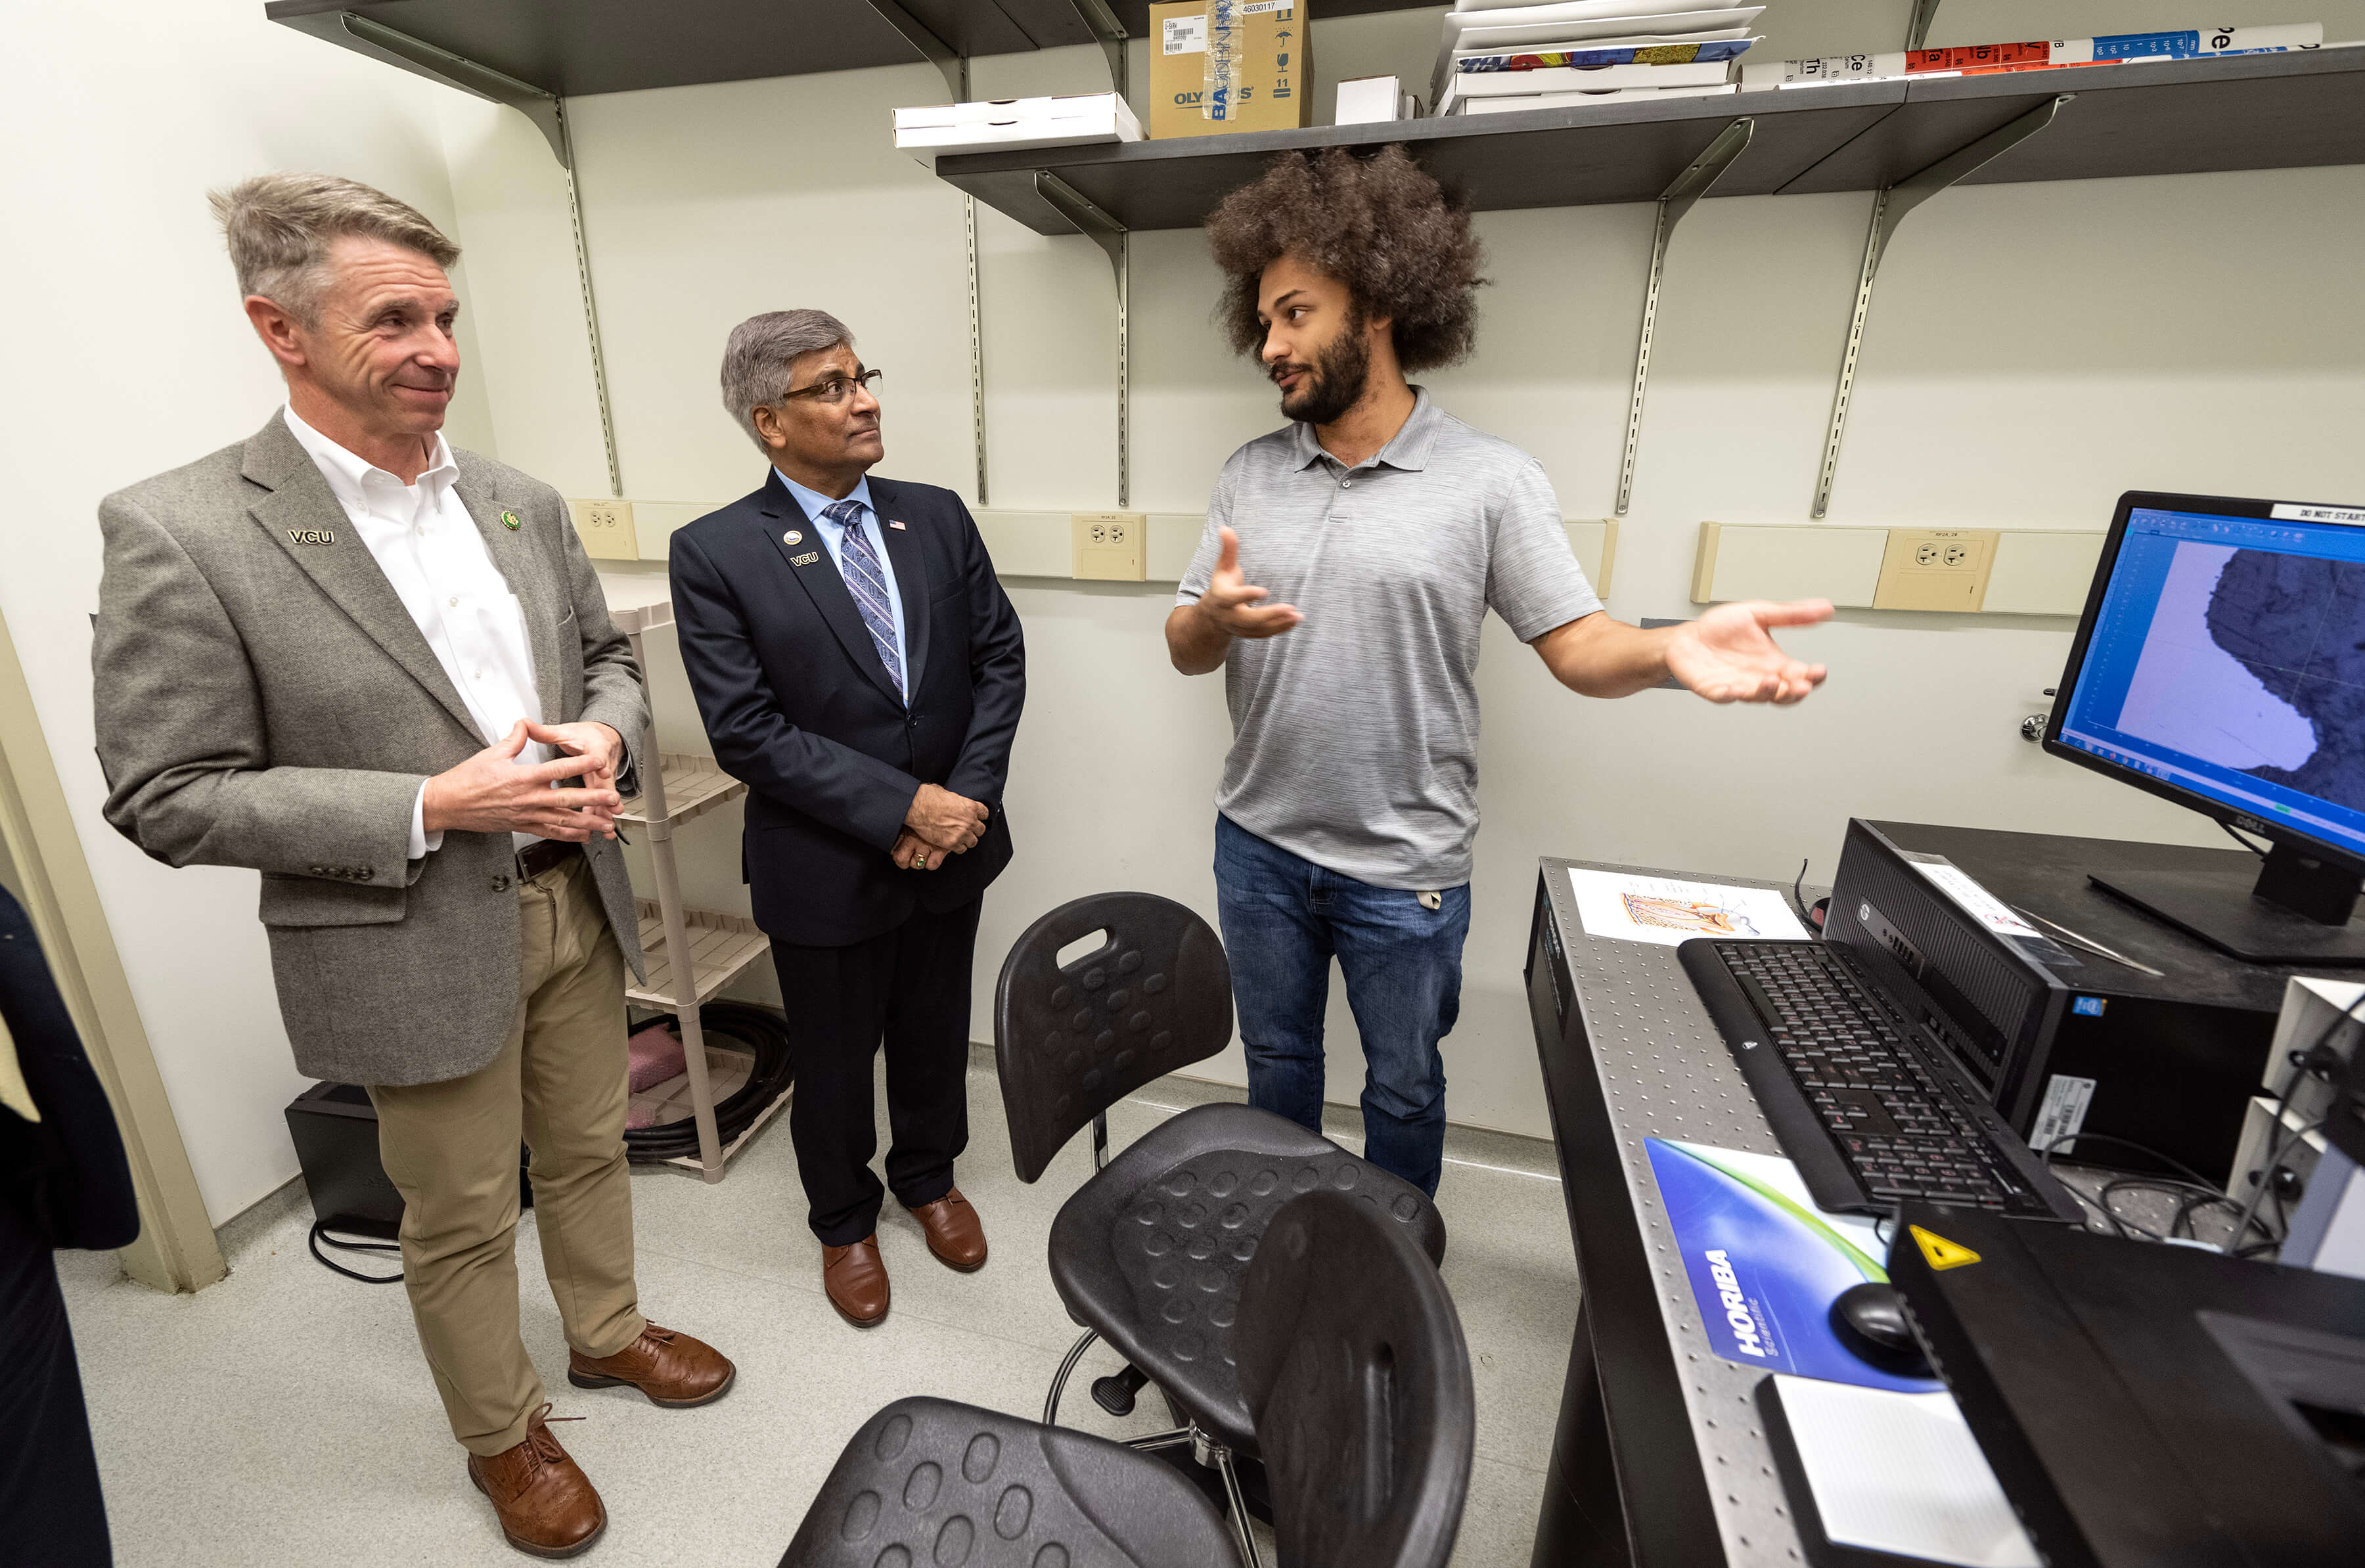 Sethuraman Panchanathan, Ph.D., director of the National Science Foundation (center) stands with two other people in front of a desk